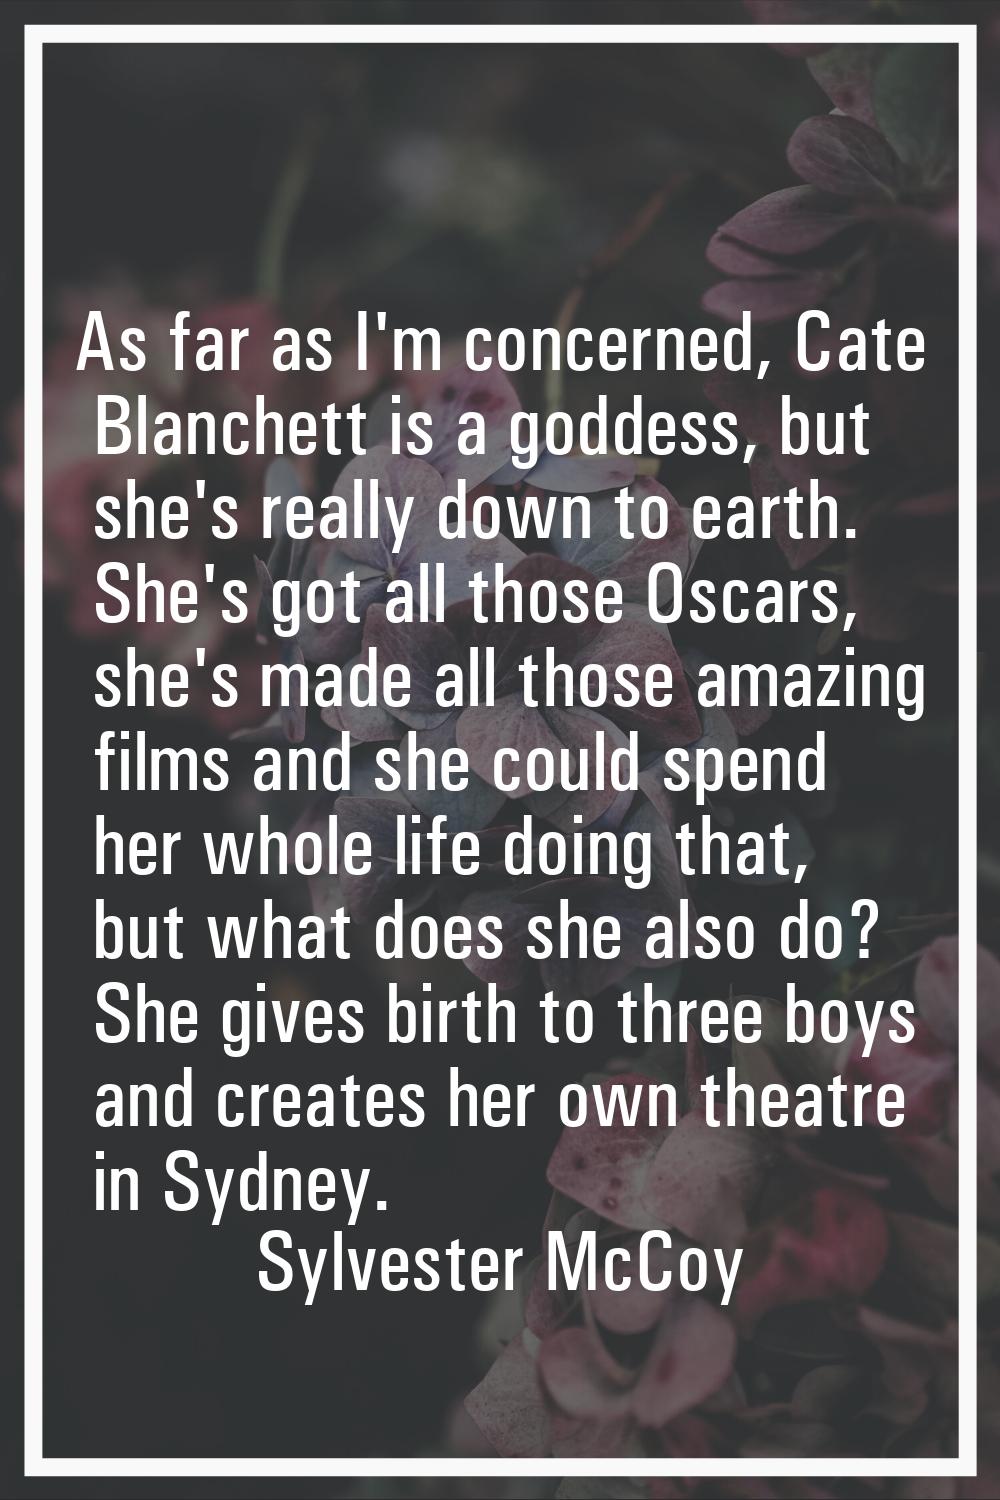 As far as I'm concerned, Cate Blanchett is a goddess, but she's really down to earth. She's got all